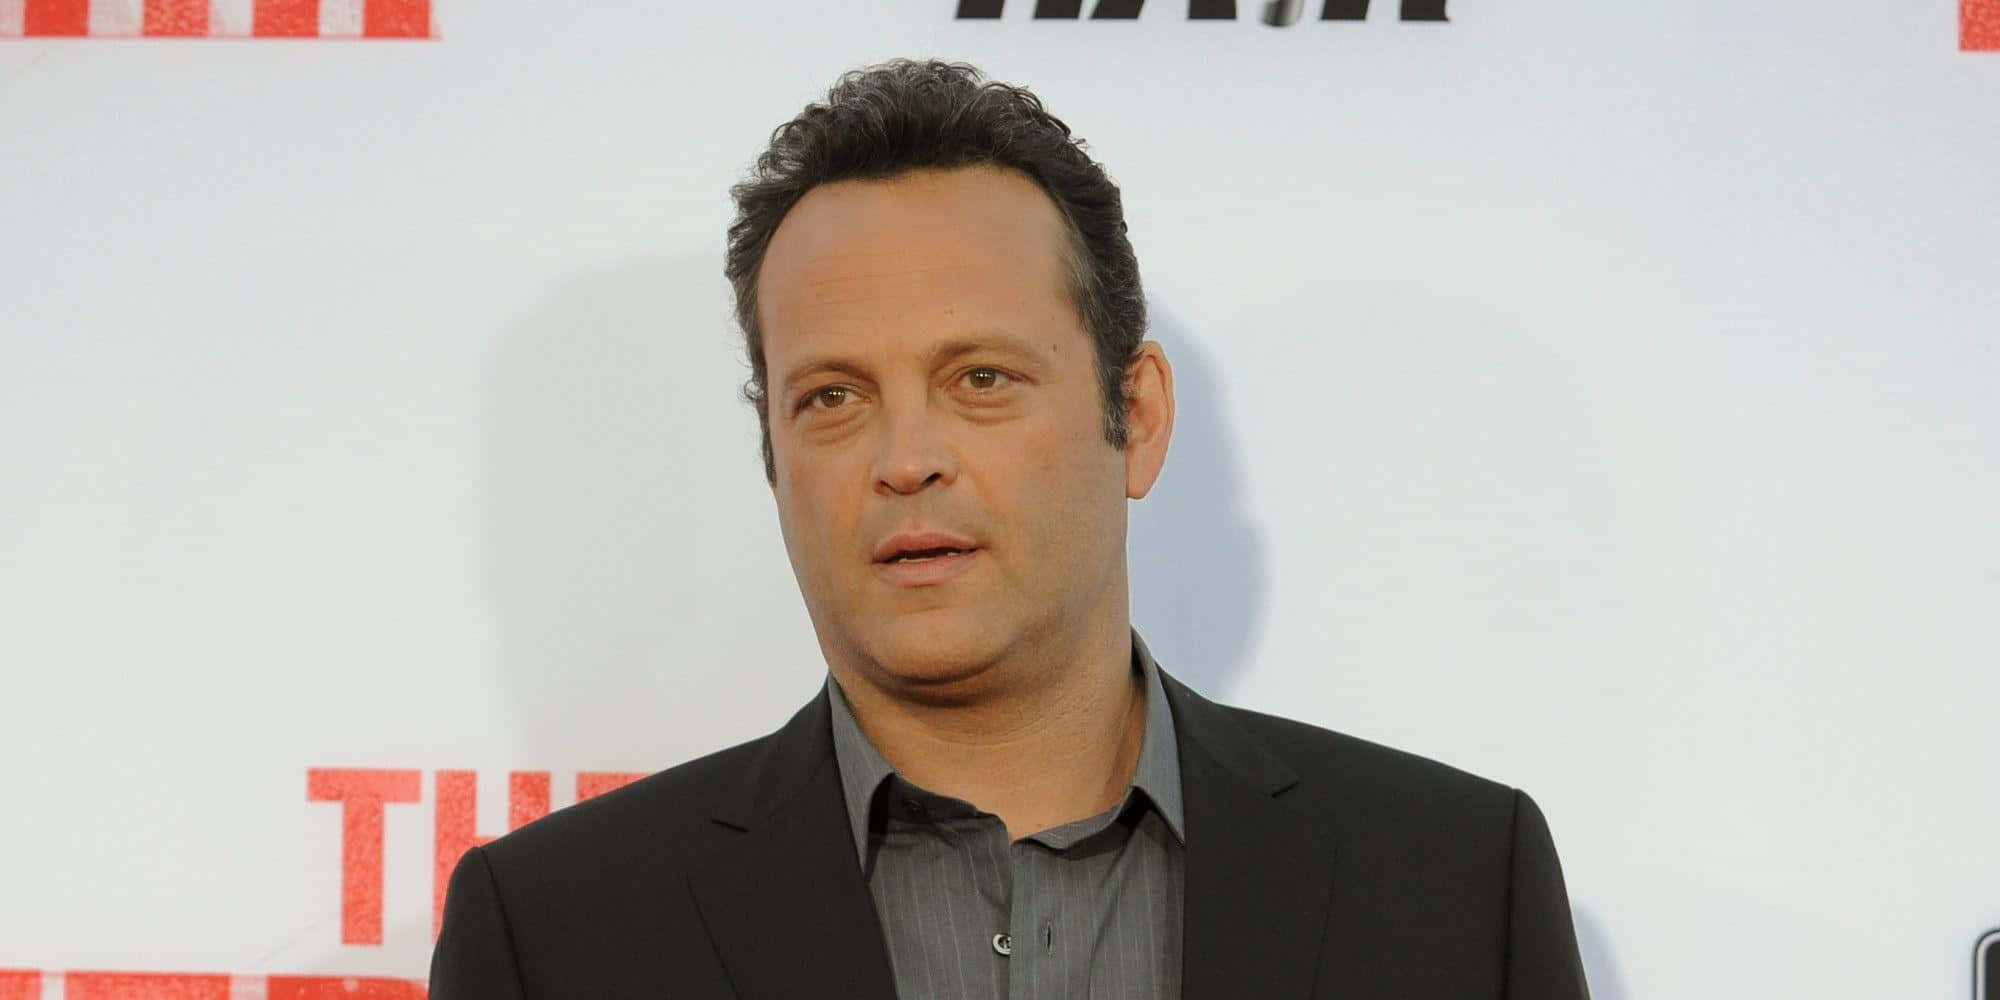 Vince Vaughn striking a pose during a photoshoot Wallpaper